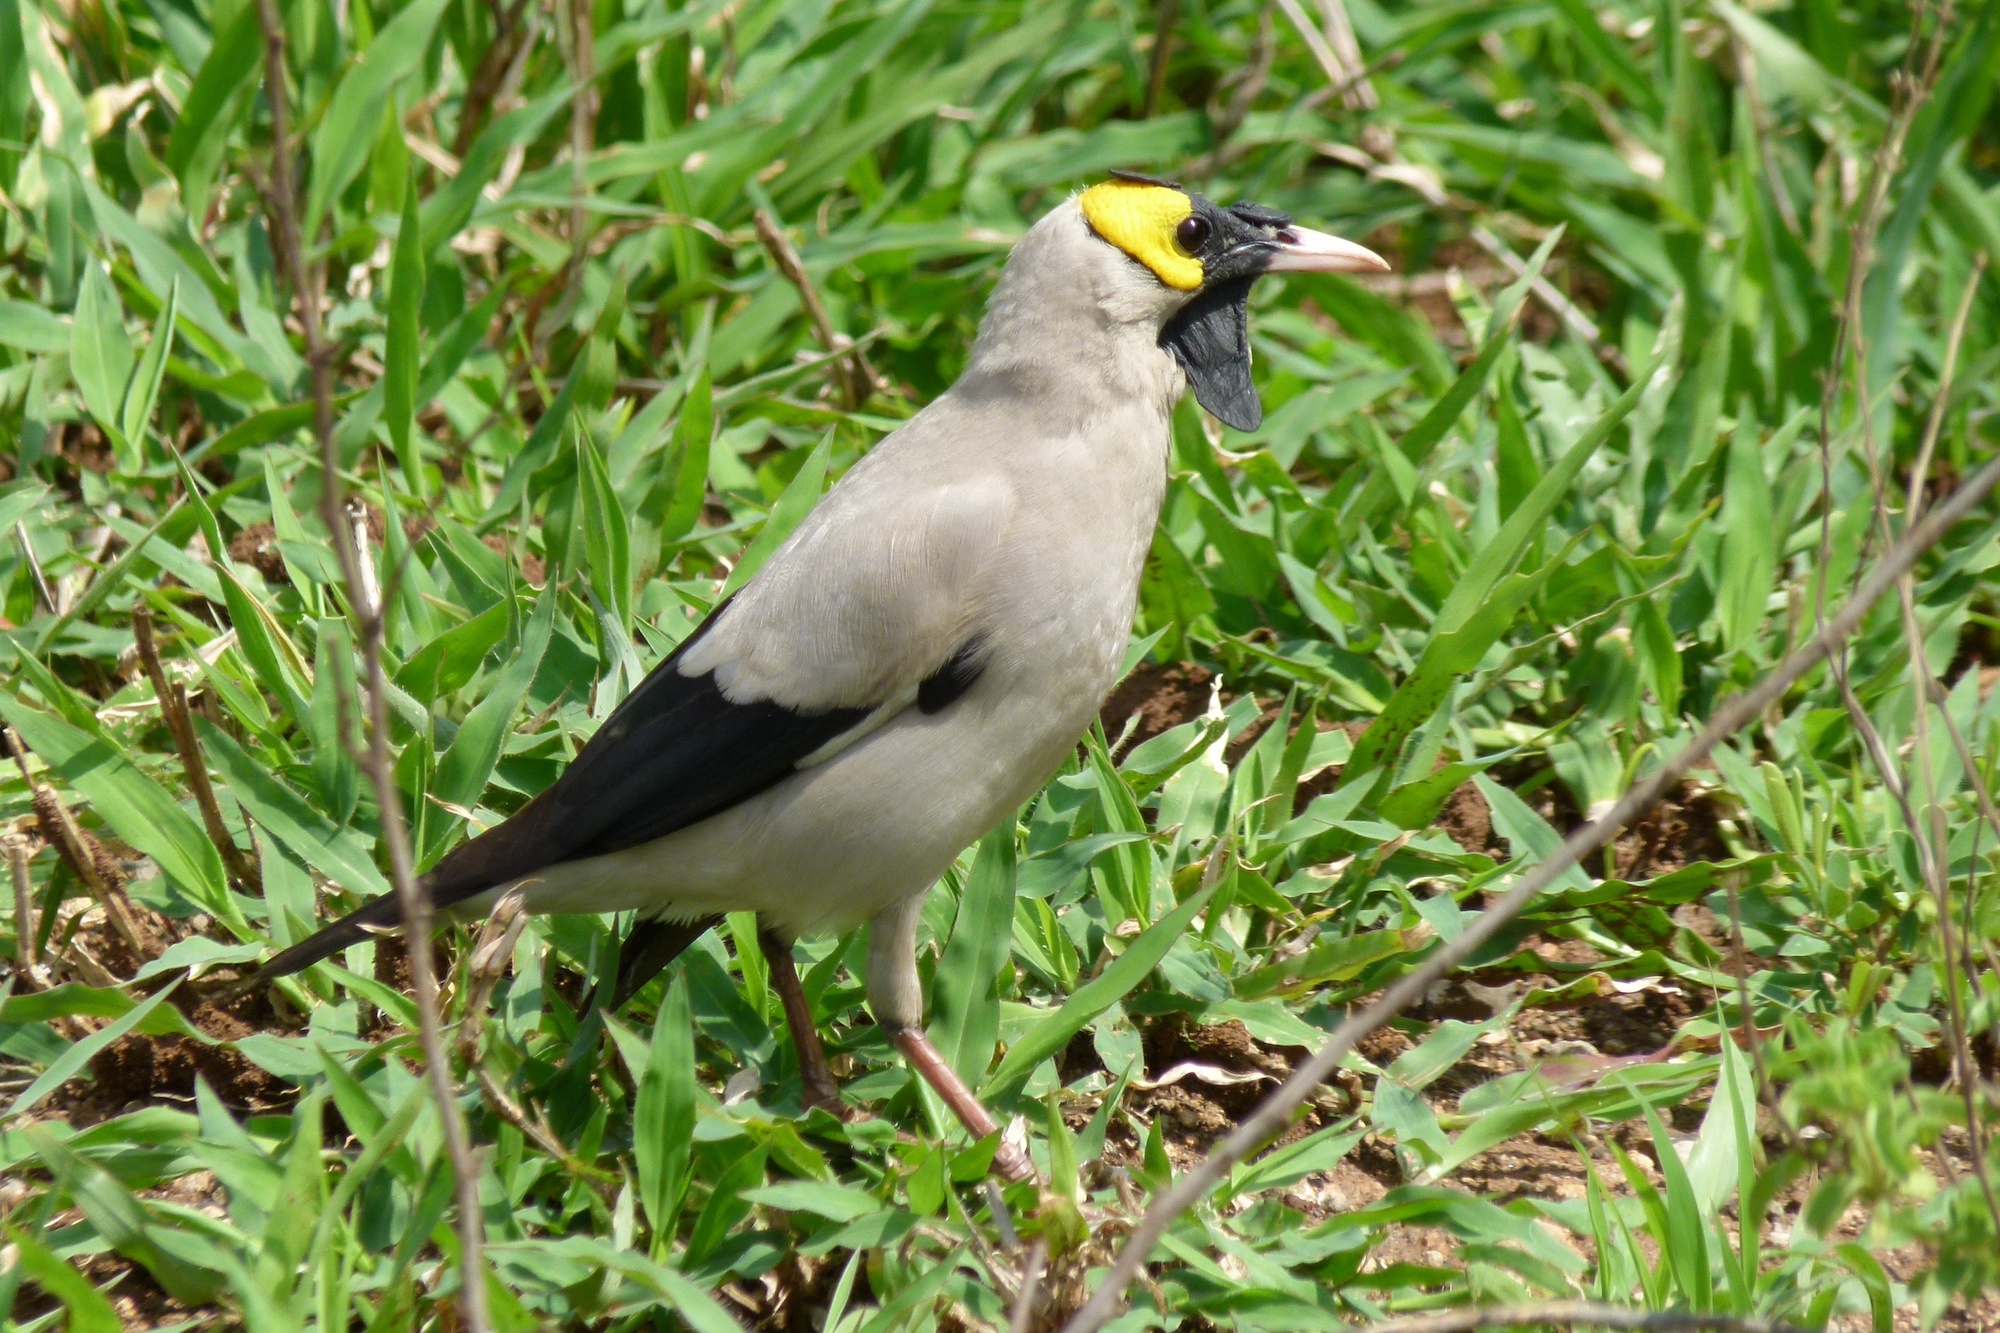 Close up of grey, black & yellow bird in a tree